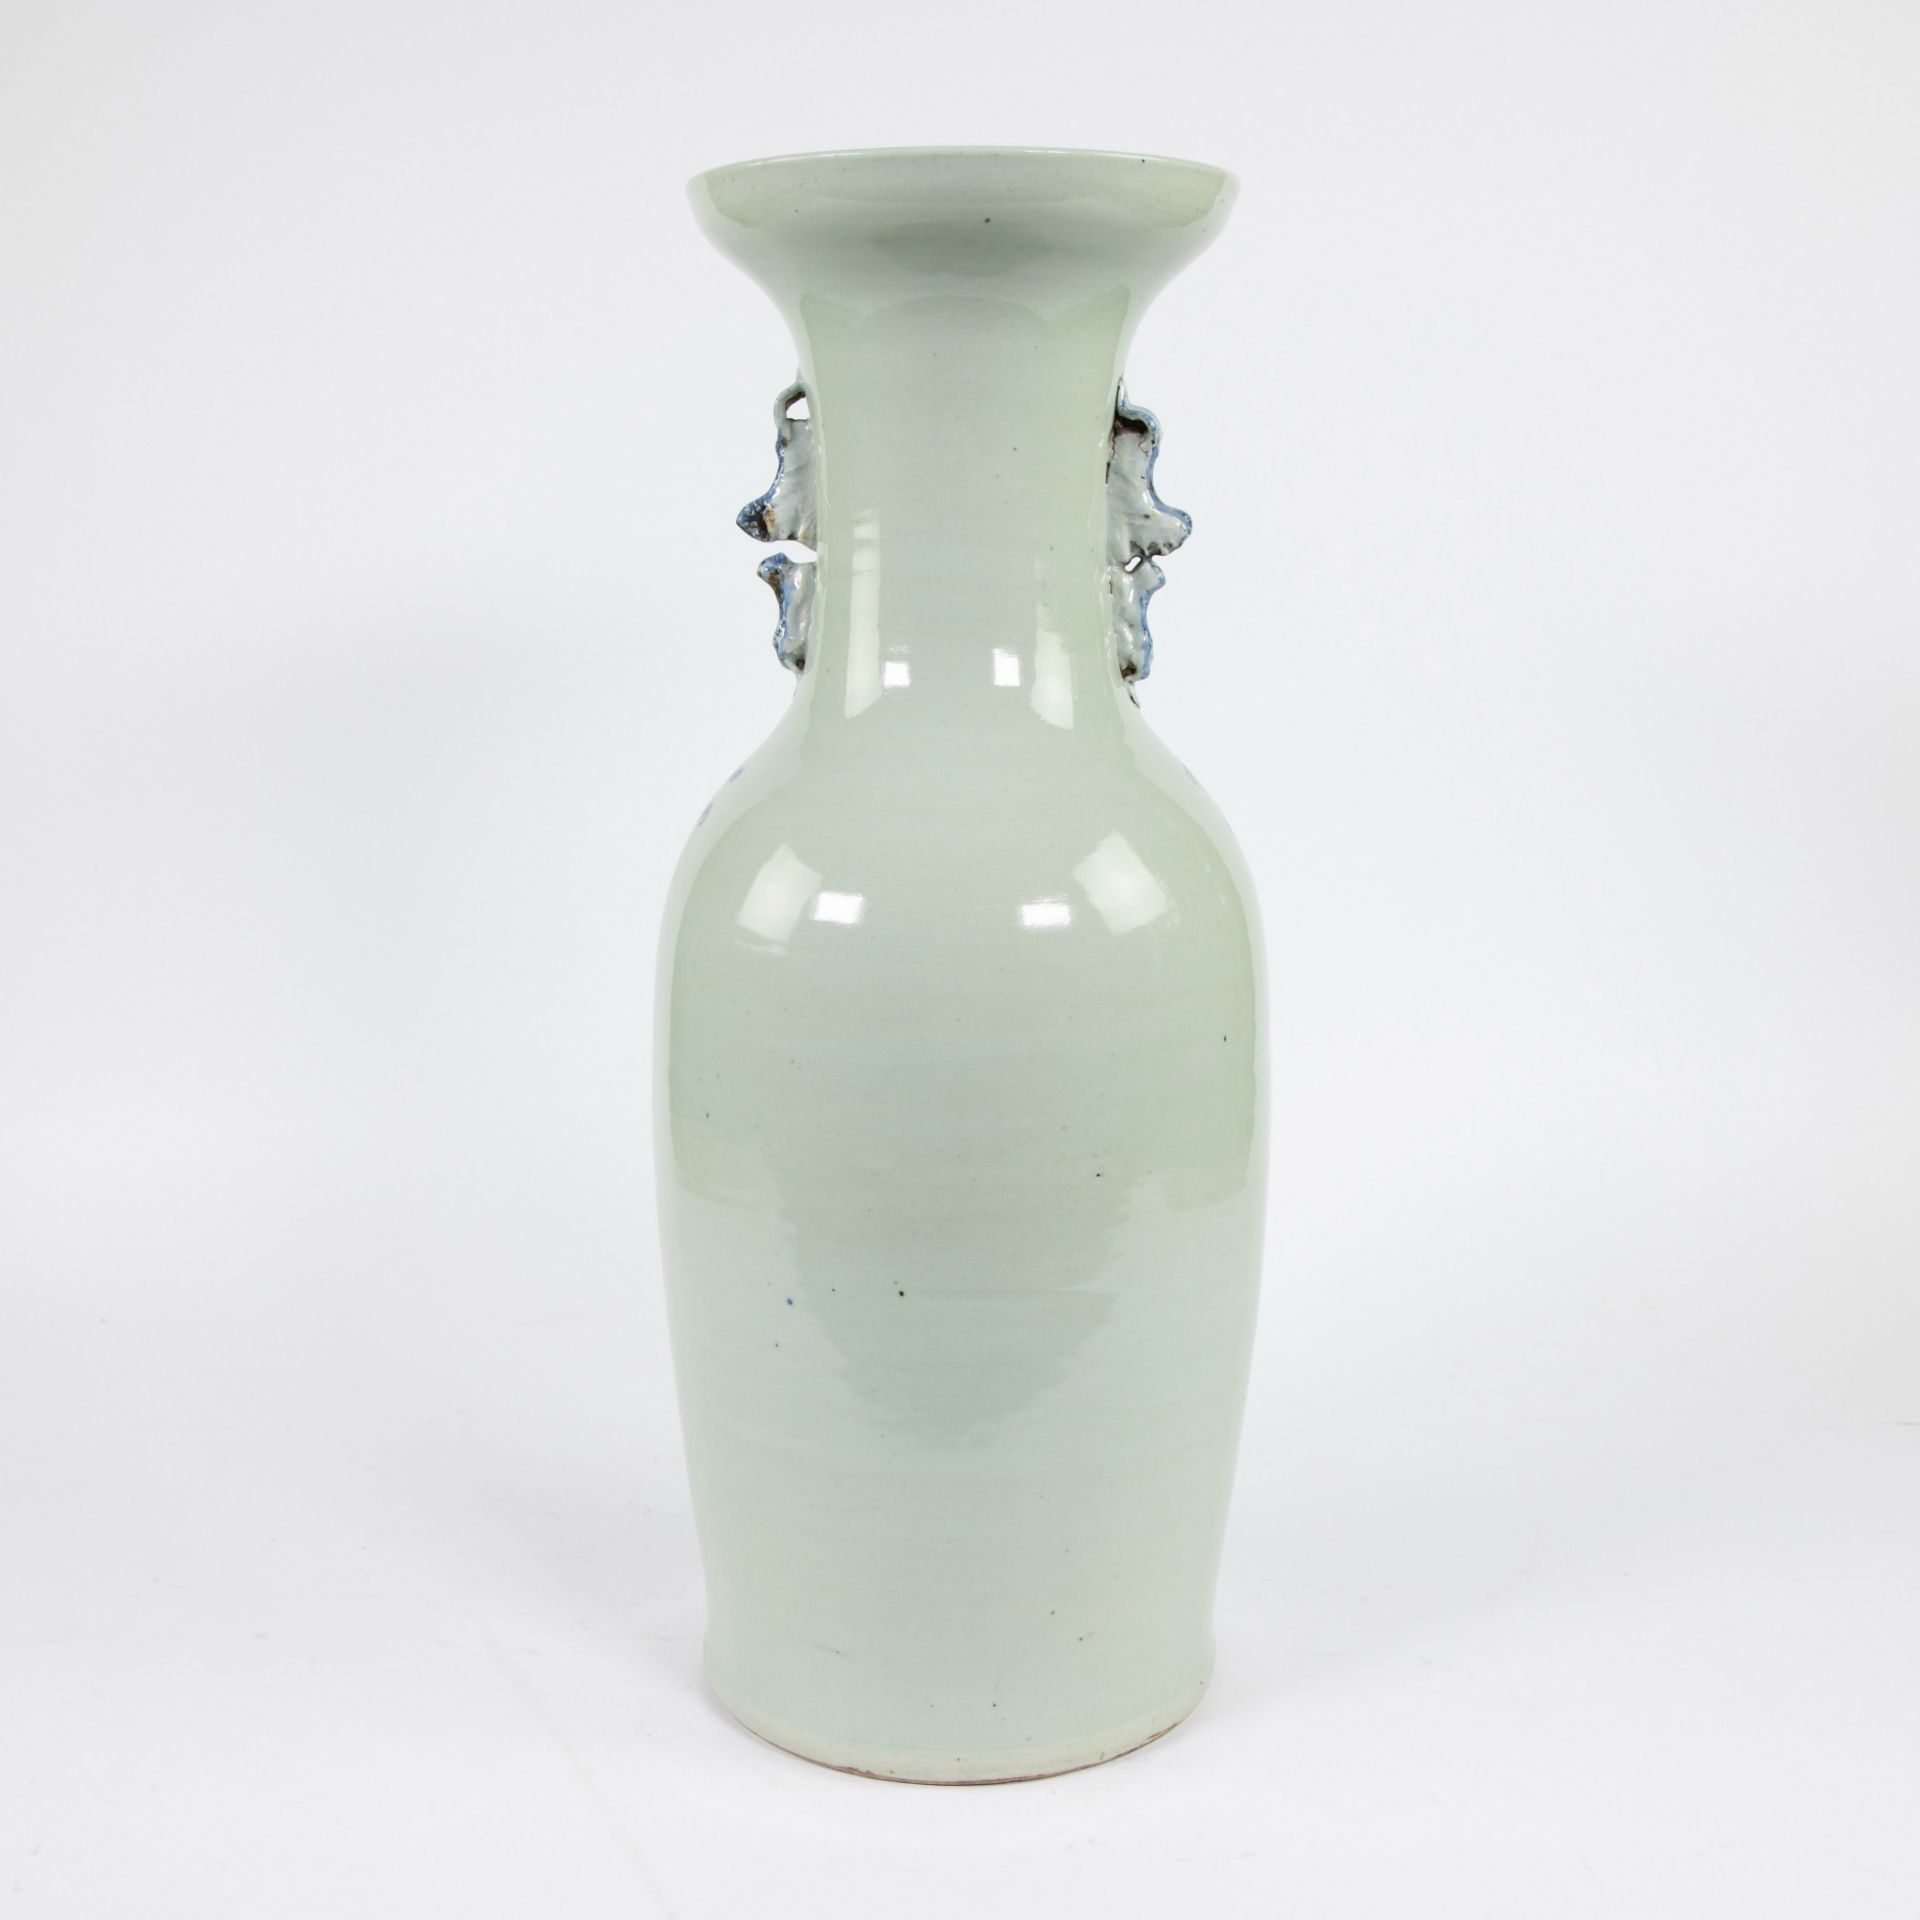 3 Chinese celadon vases late 19th century - Image 4 of 11